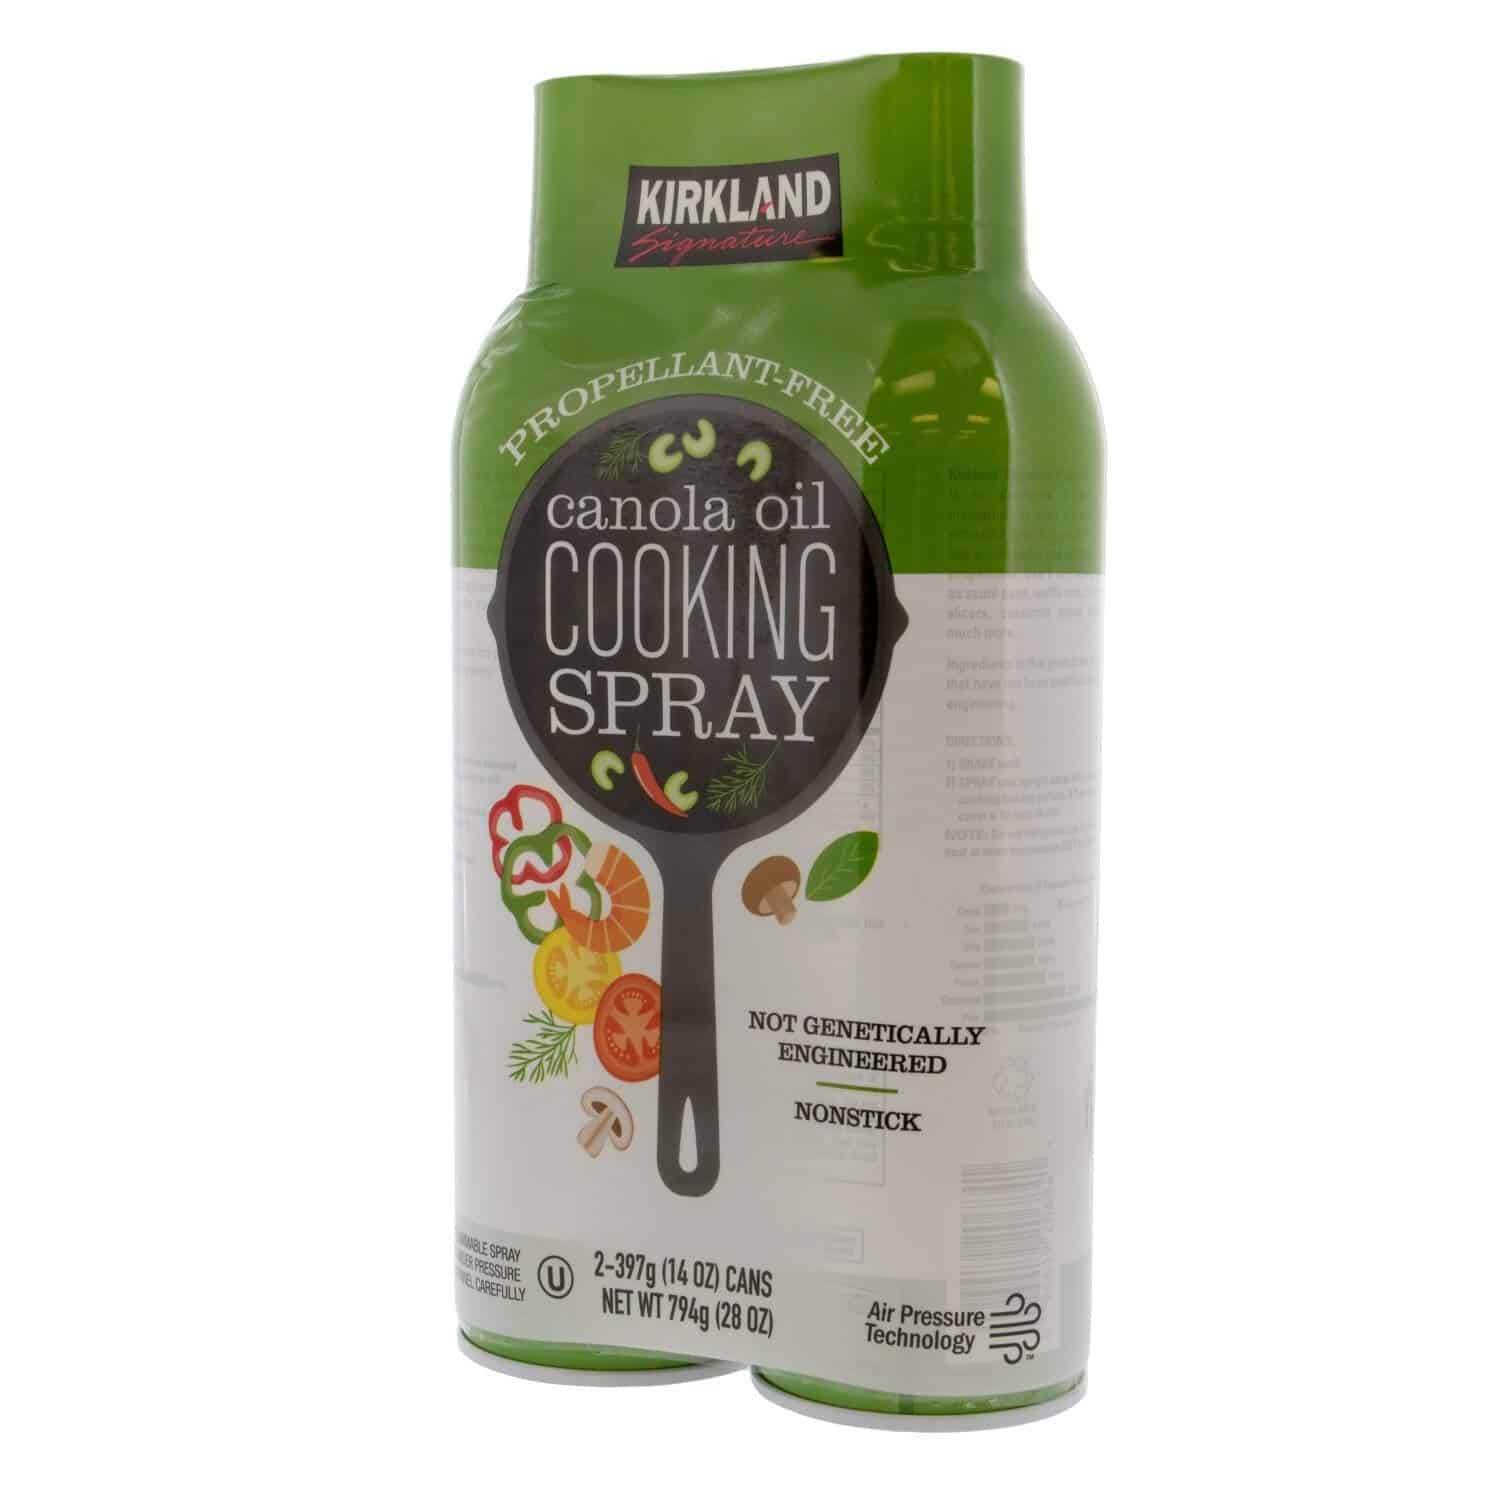 Best cooking oil for seasoning a smoker- Kirkland Signature Canola Oil Cooking Spray